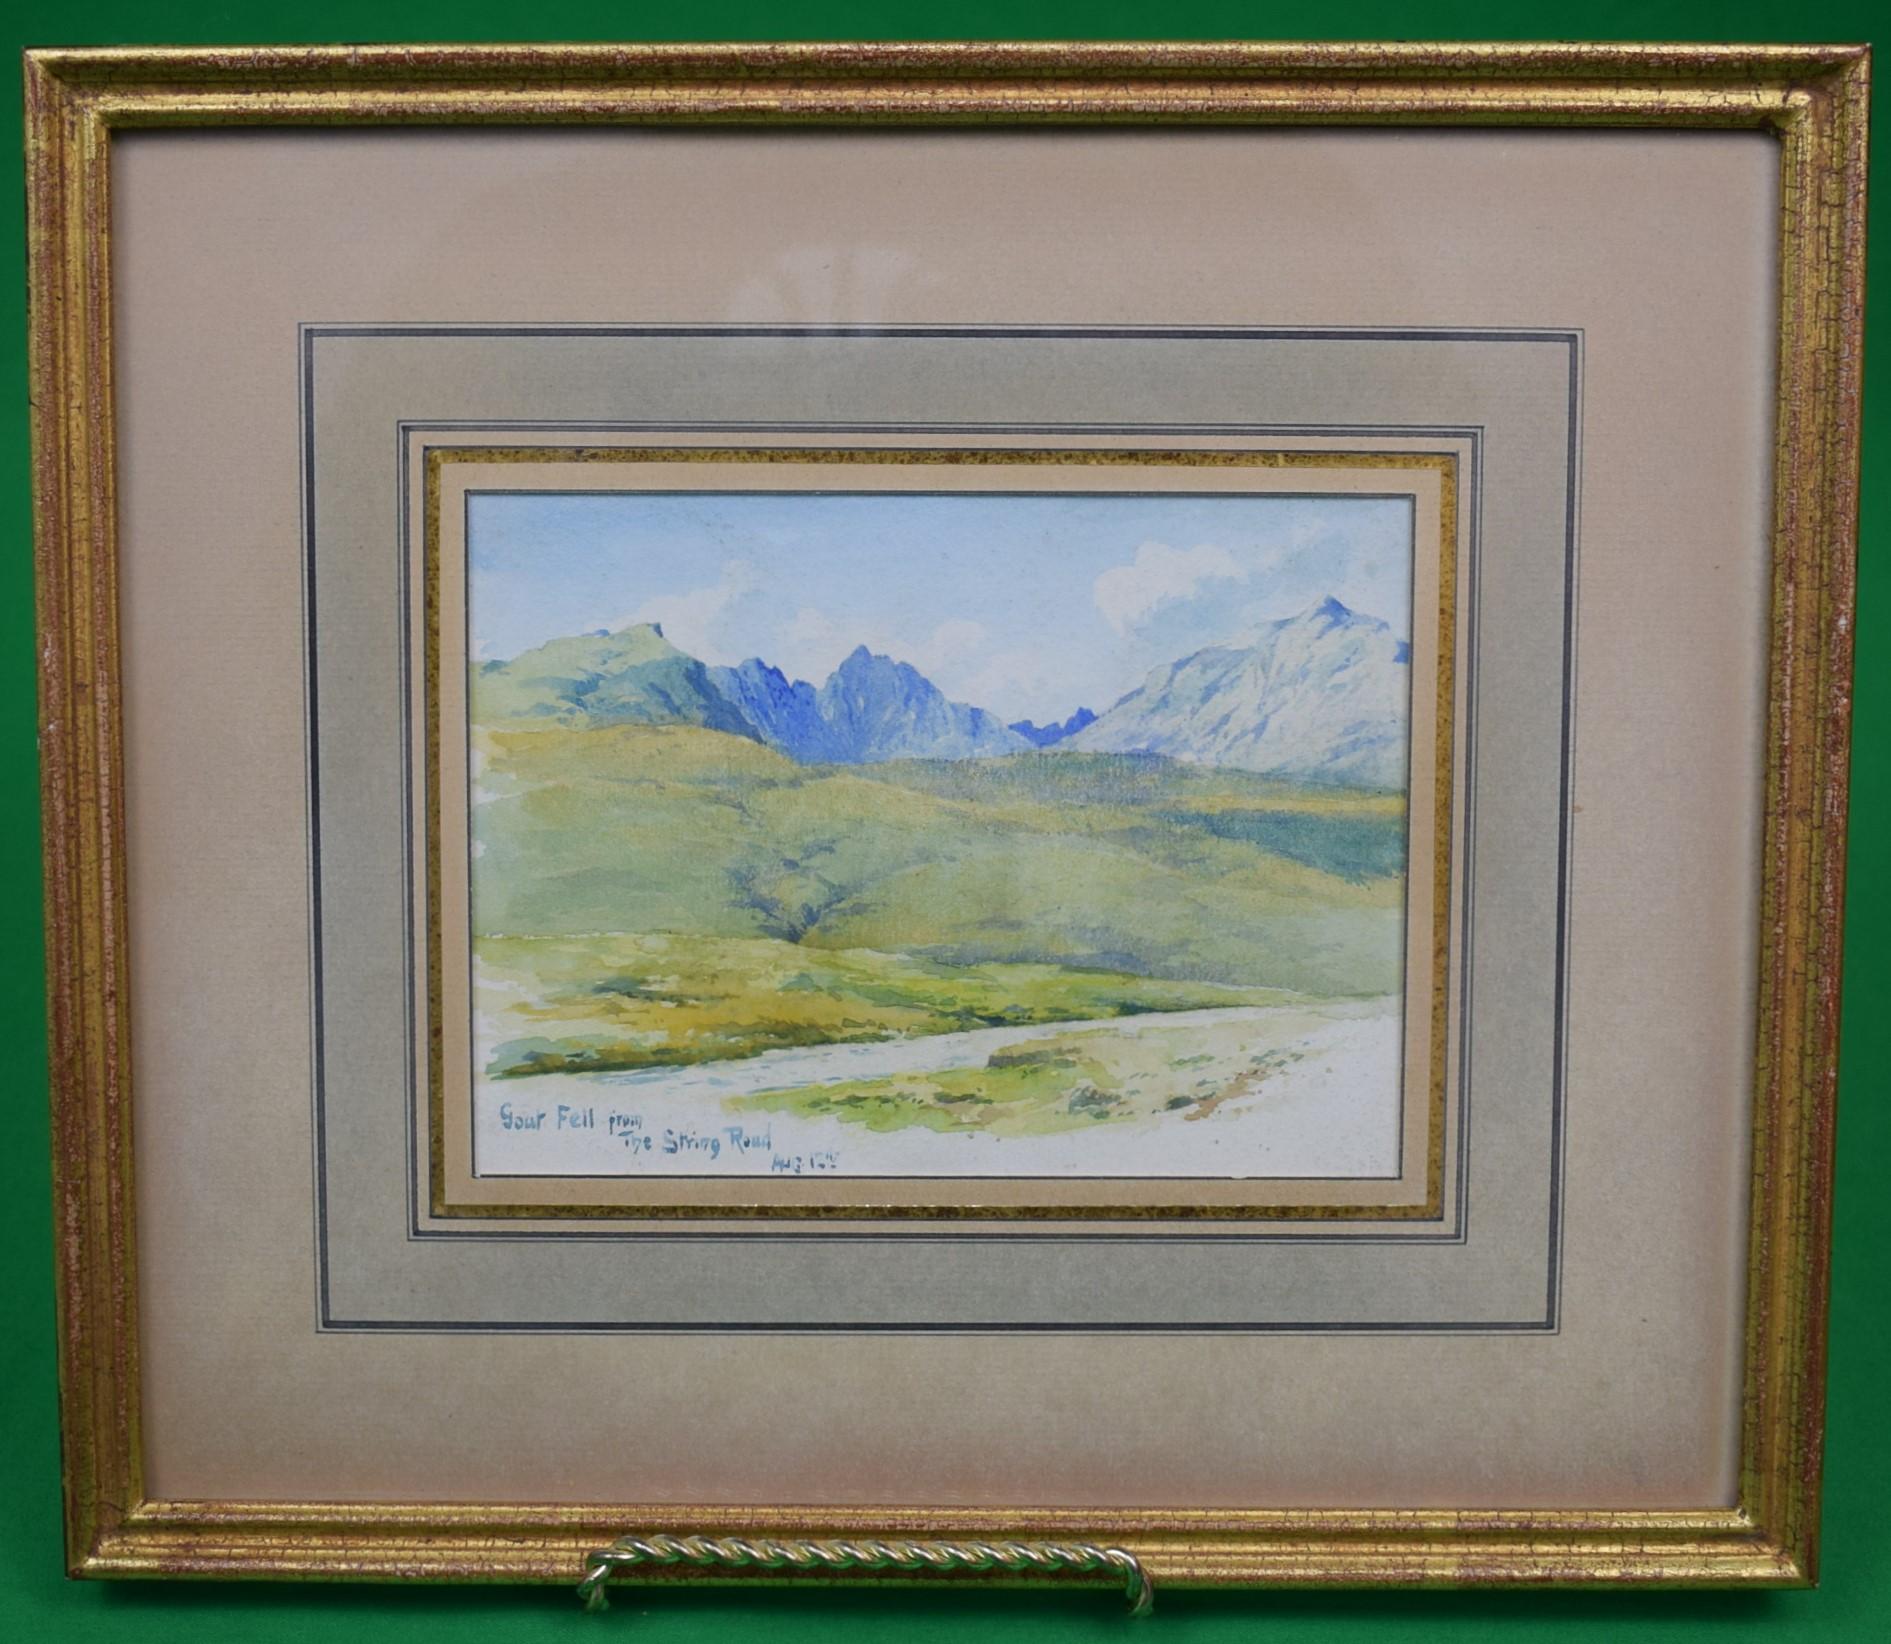 Unknown Landscape Art - "Goat Fell From The Spring Road Aug. 12th Scottish Landscape Watercolour"